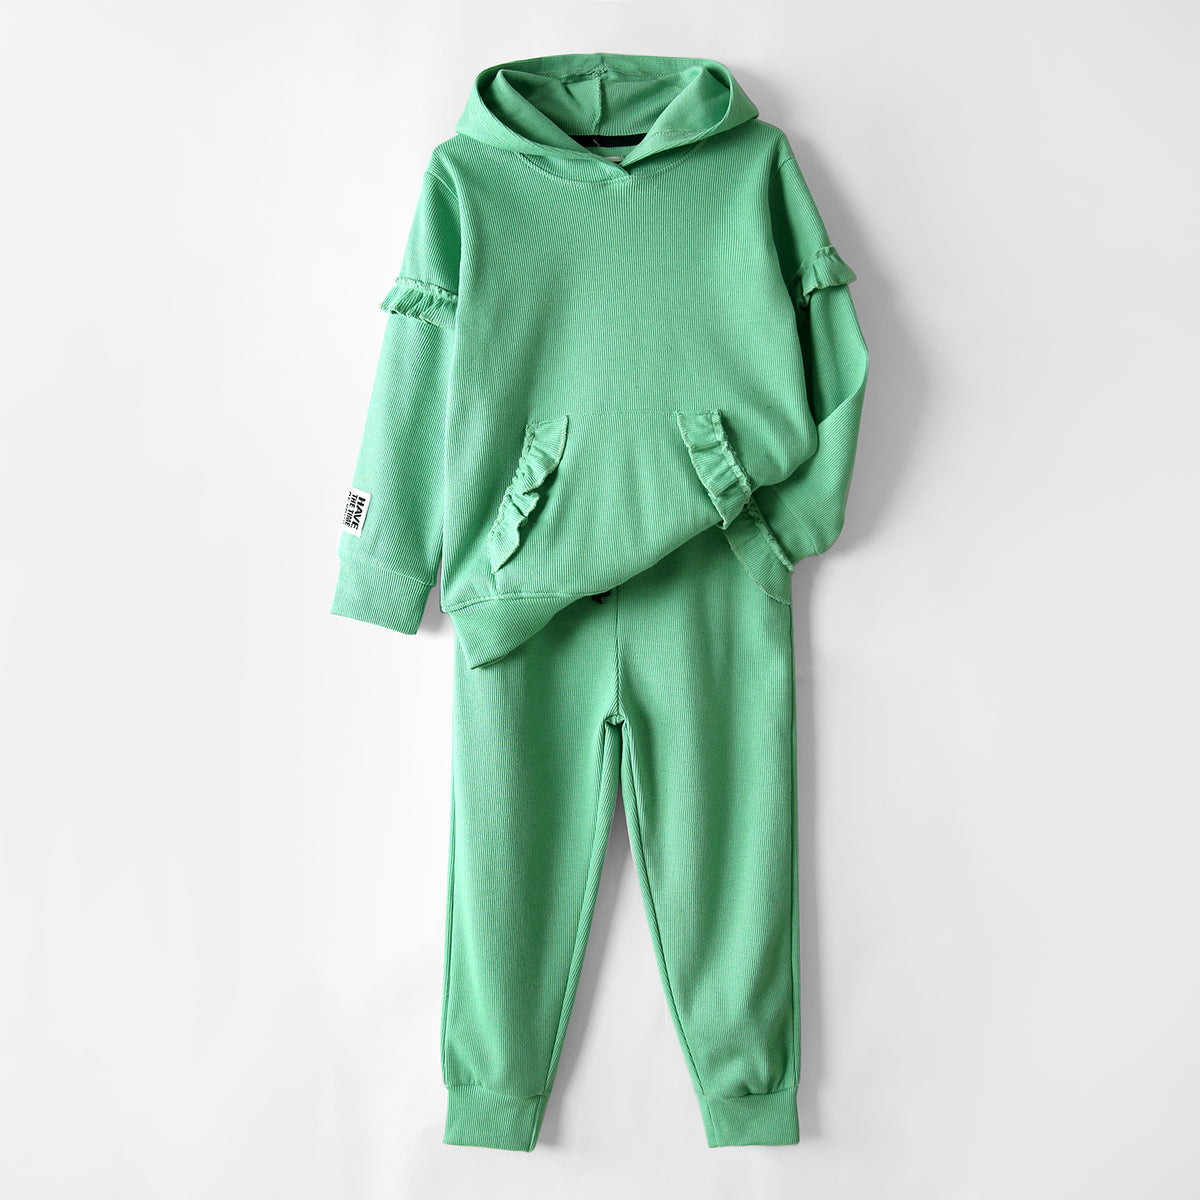 Premium Quality Cyan 2 Piece Frill Tracksuit For Girls